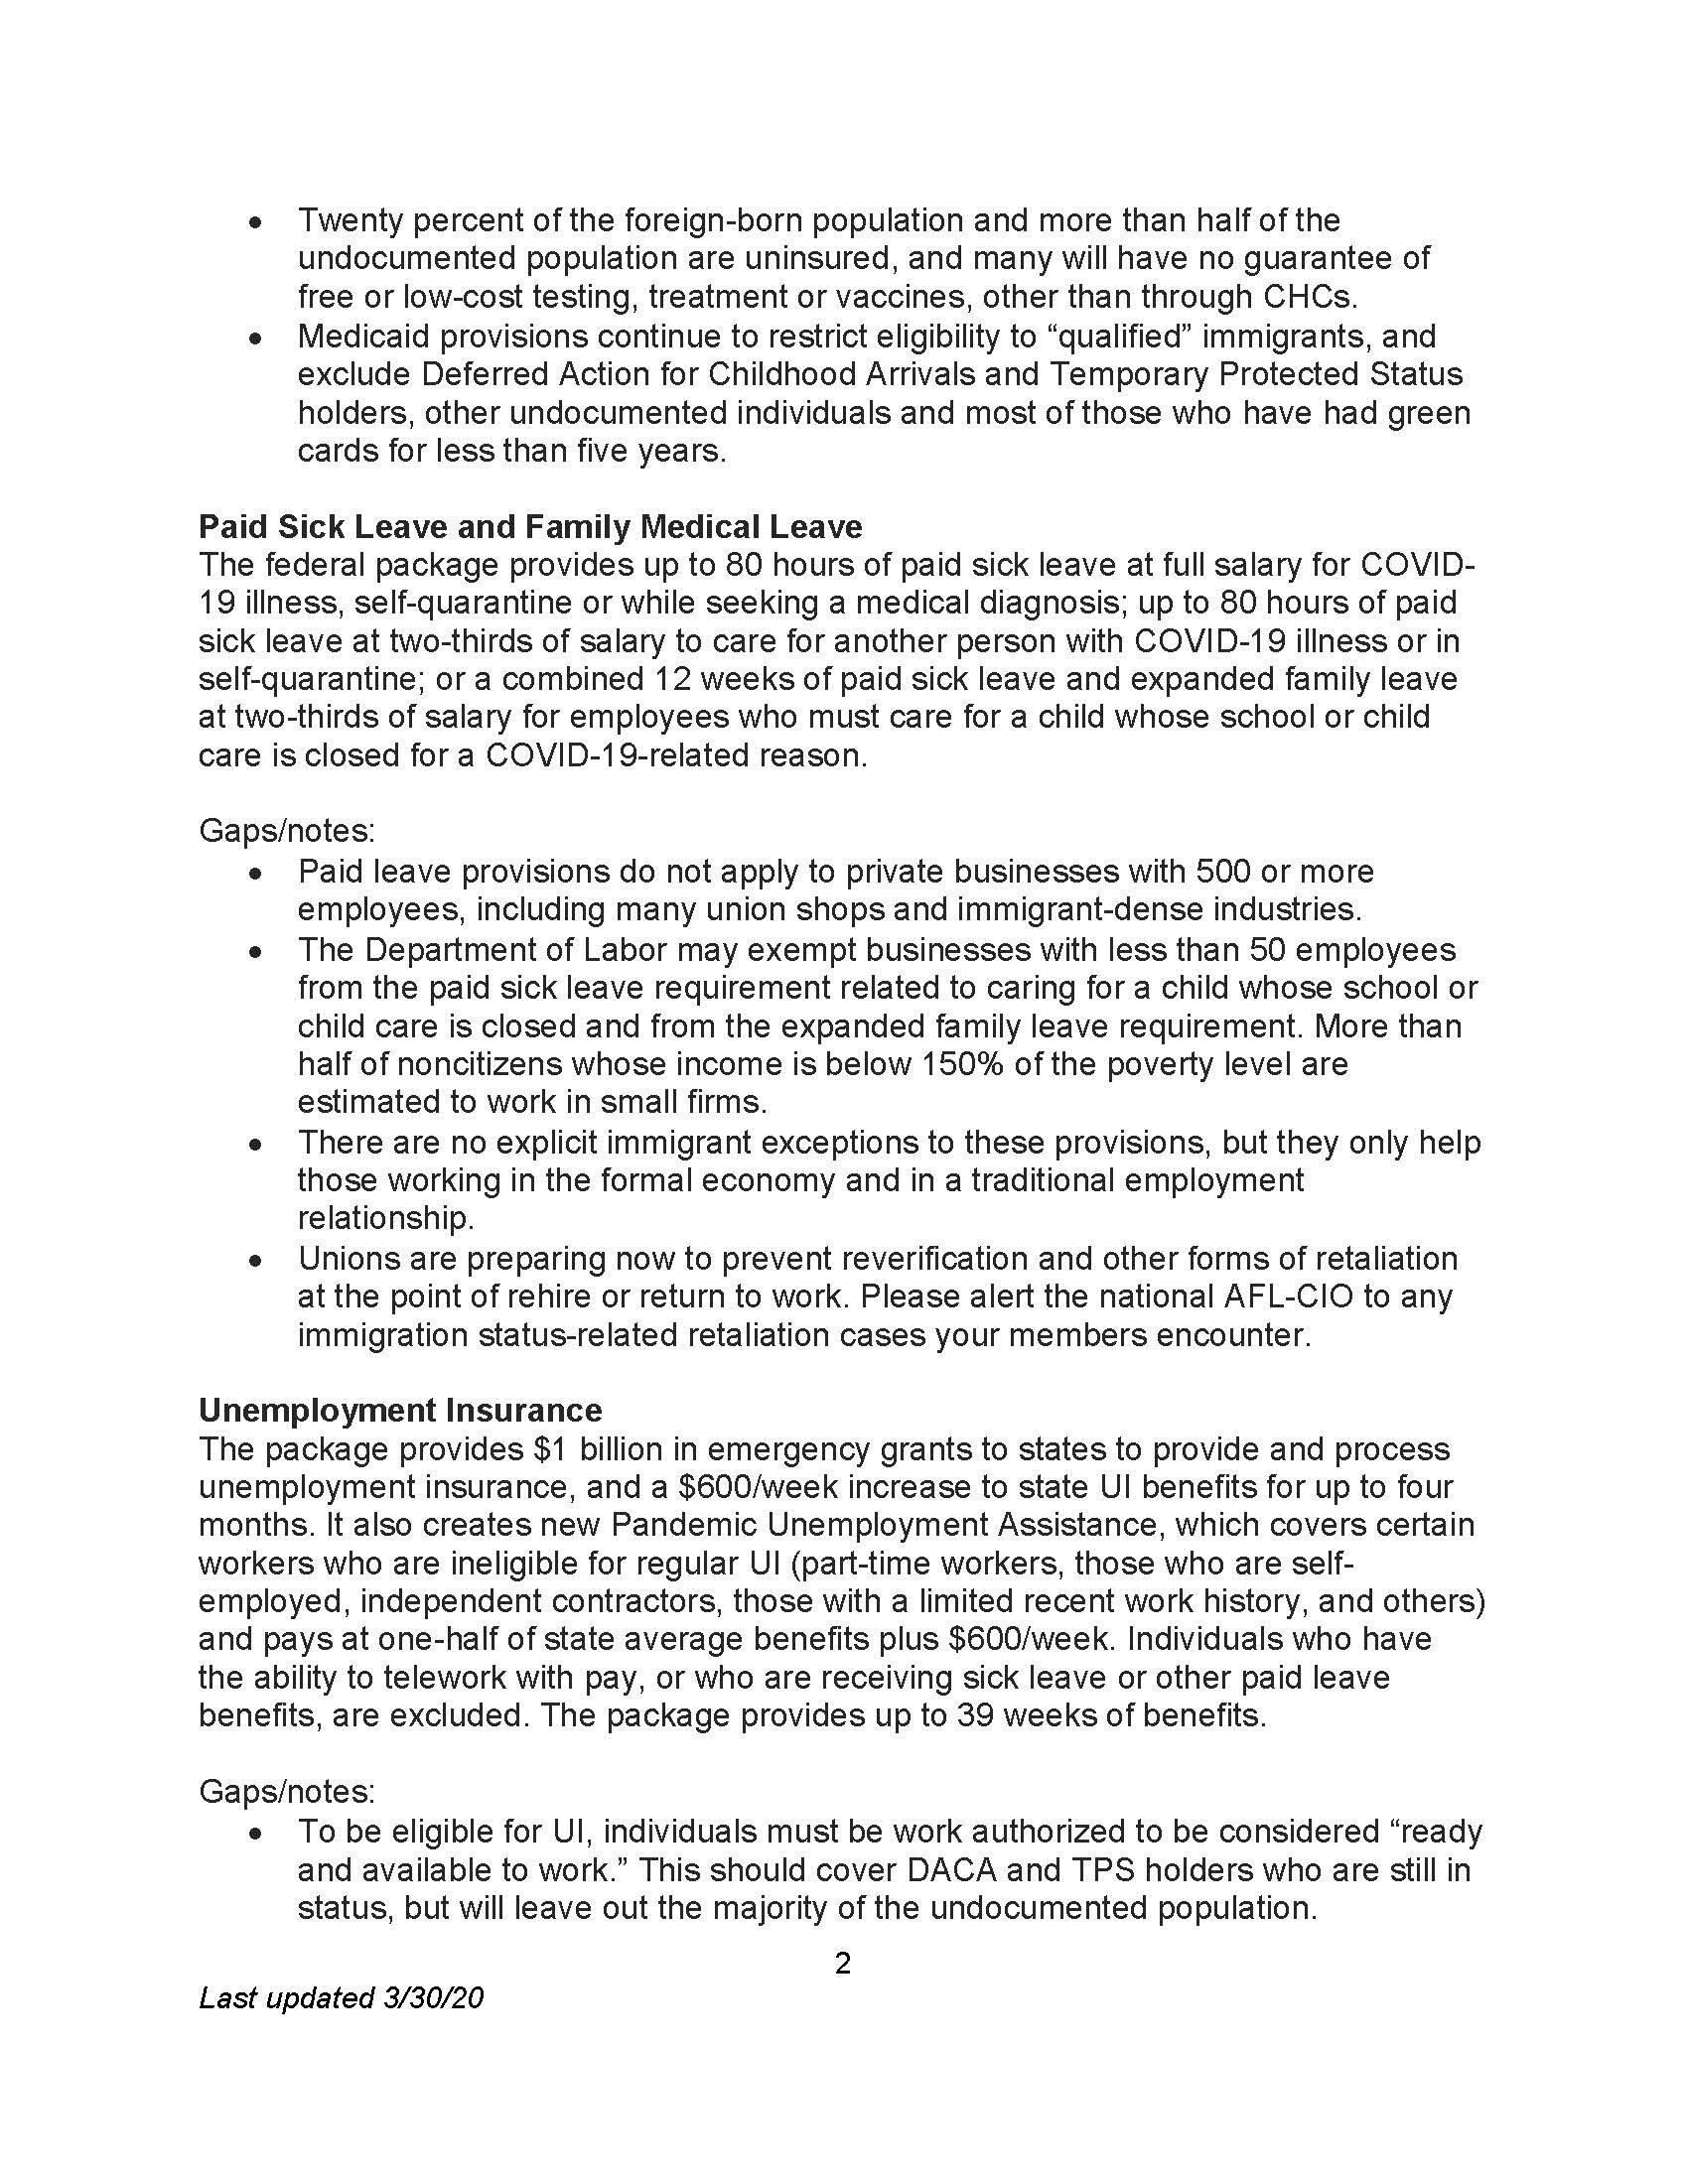 AFL-CIO-COVID-19-and-Immigrant-Workers-Fact-Sheet_Page_2.jpg